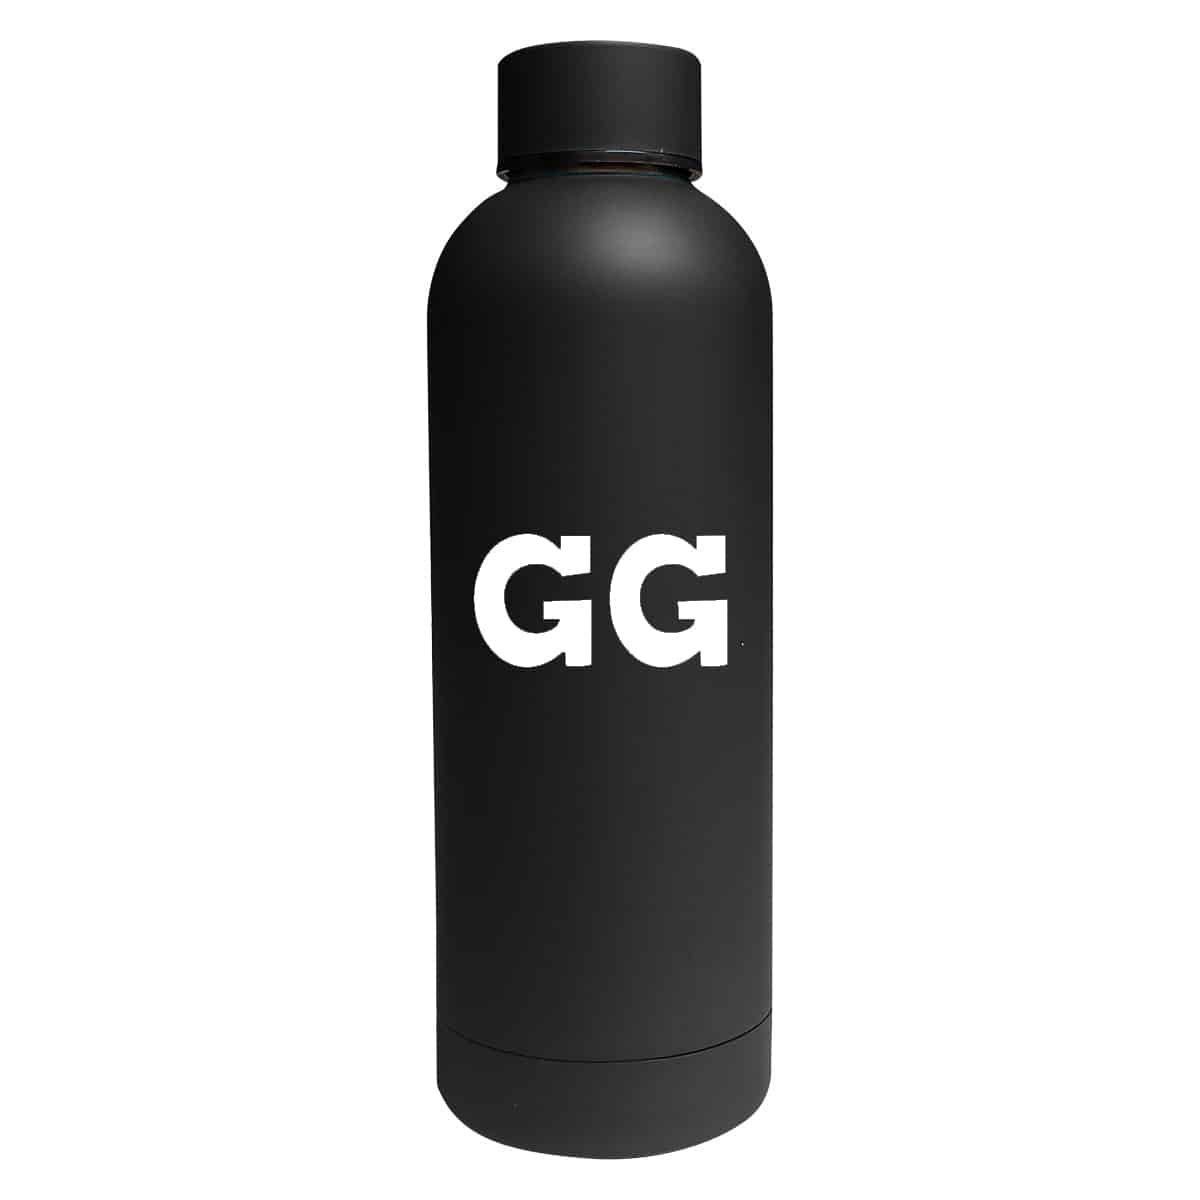 Personalized Gucci Theme Water Bottle Label